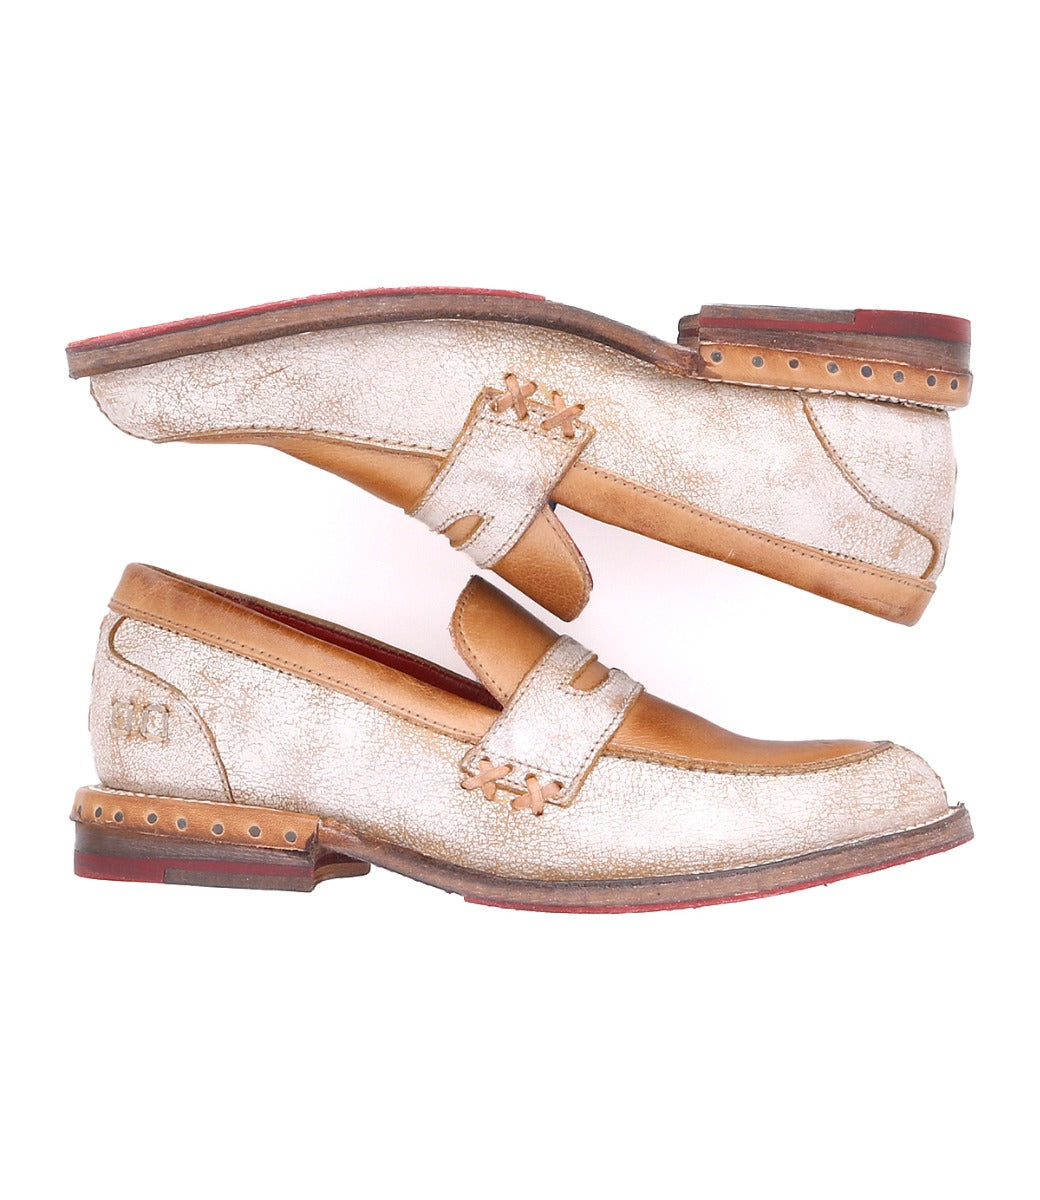 A pair of Bed Stu women's loafers with tan soles